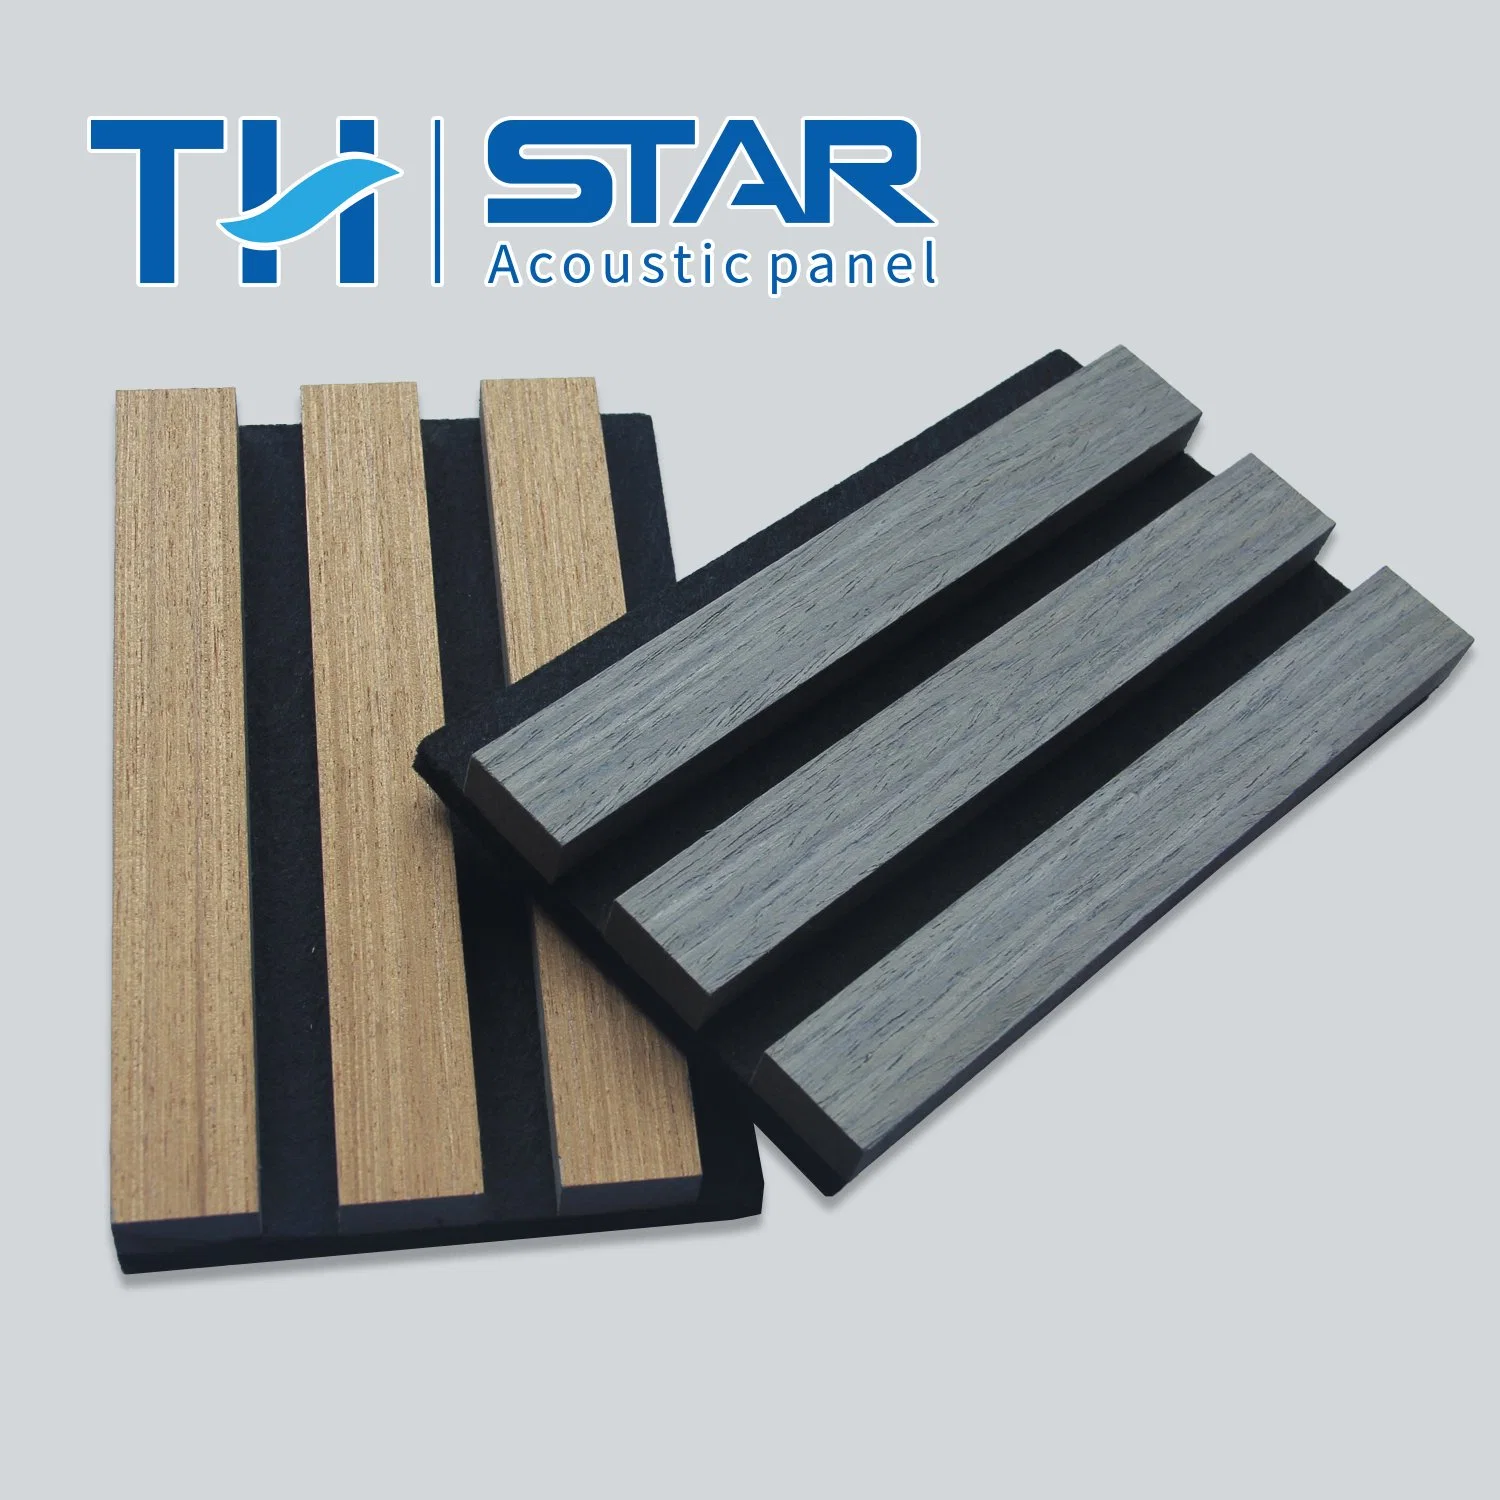 Factory Sound Absorption Decorative Board MDF+Pet and Slatted Wood Veneer Acoustic Panel for Indoor Ceiiing